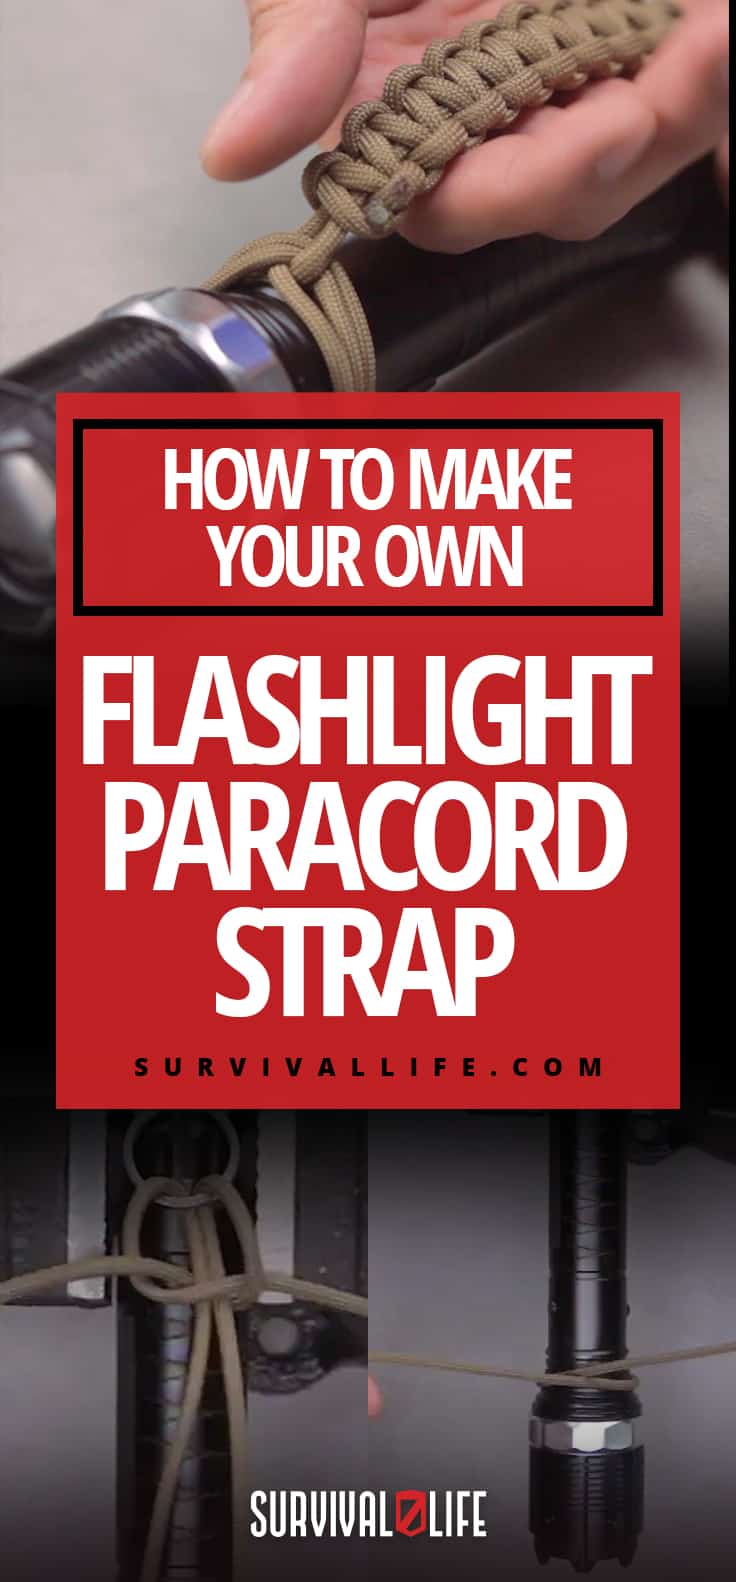 How to Make Your Own Flashlight Paracord Strap